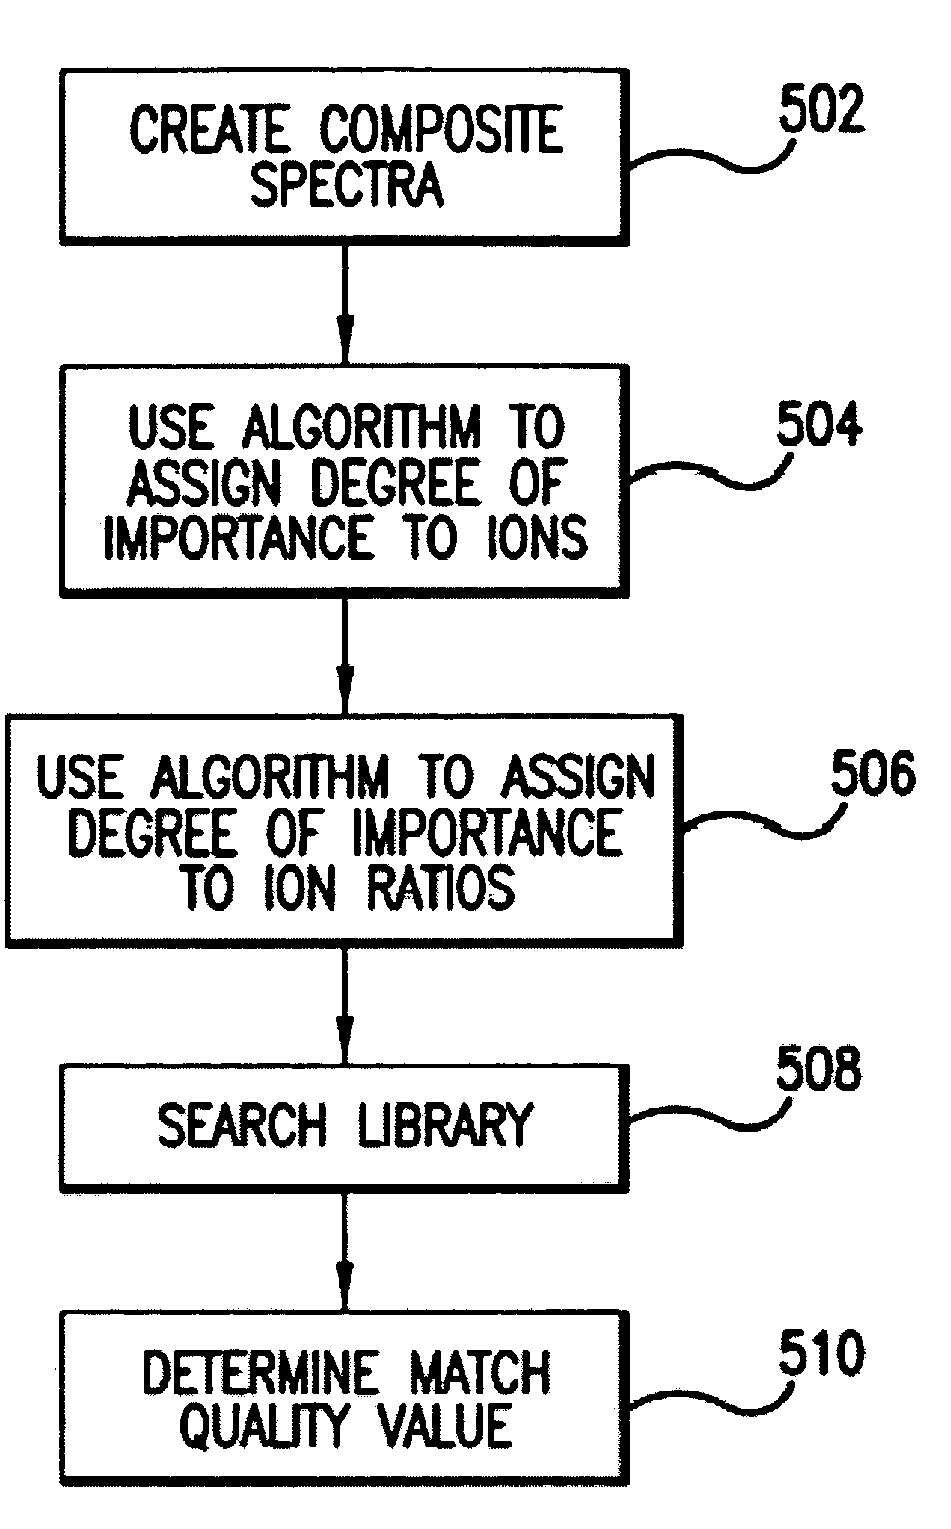 Dynamic library searching